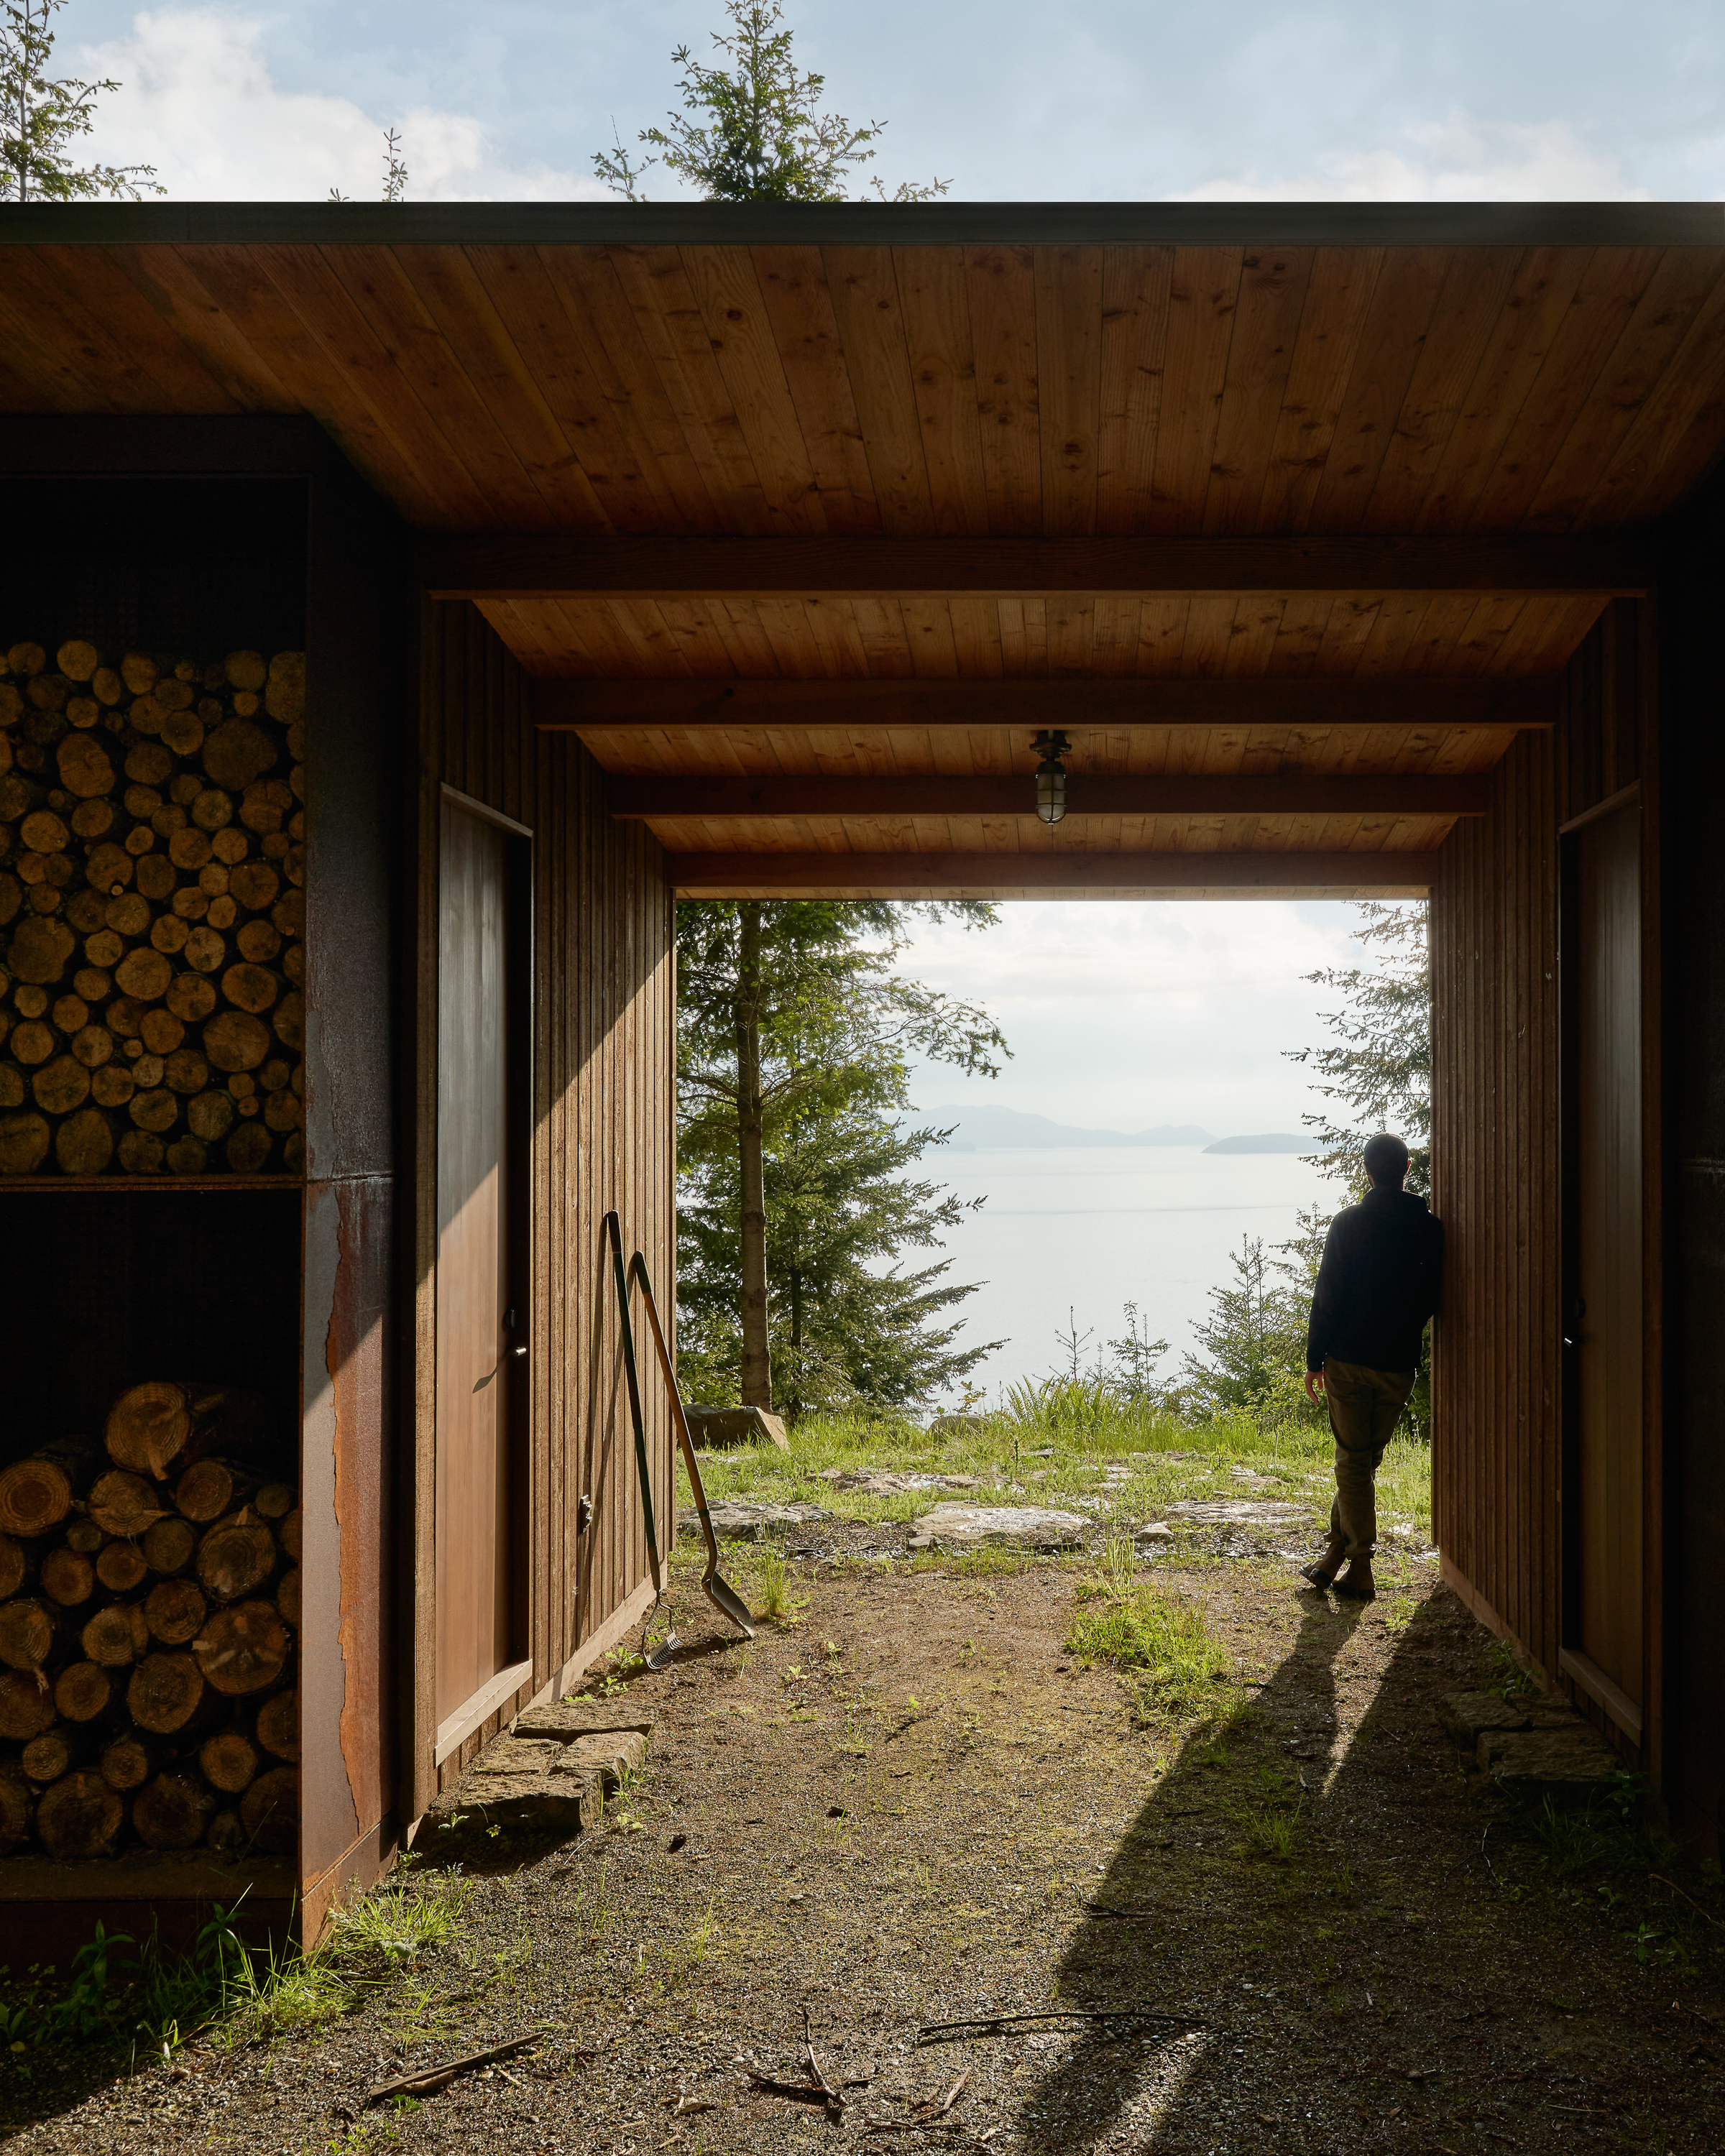 Integrated firewood storage at the writer's studio in the woods.